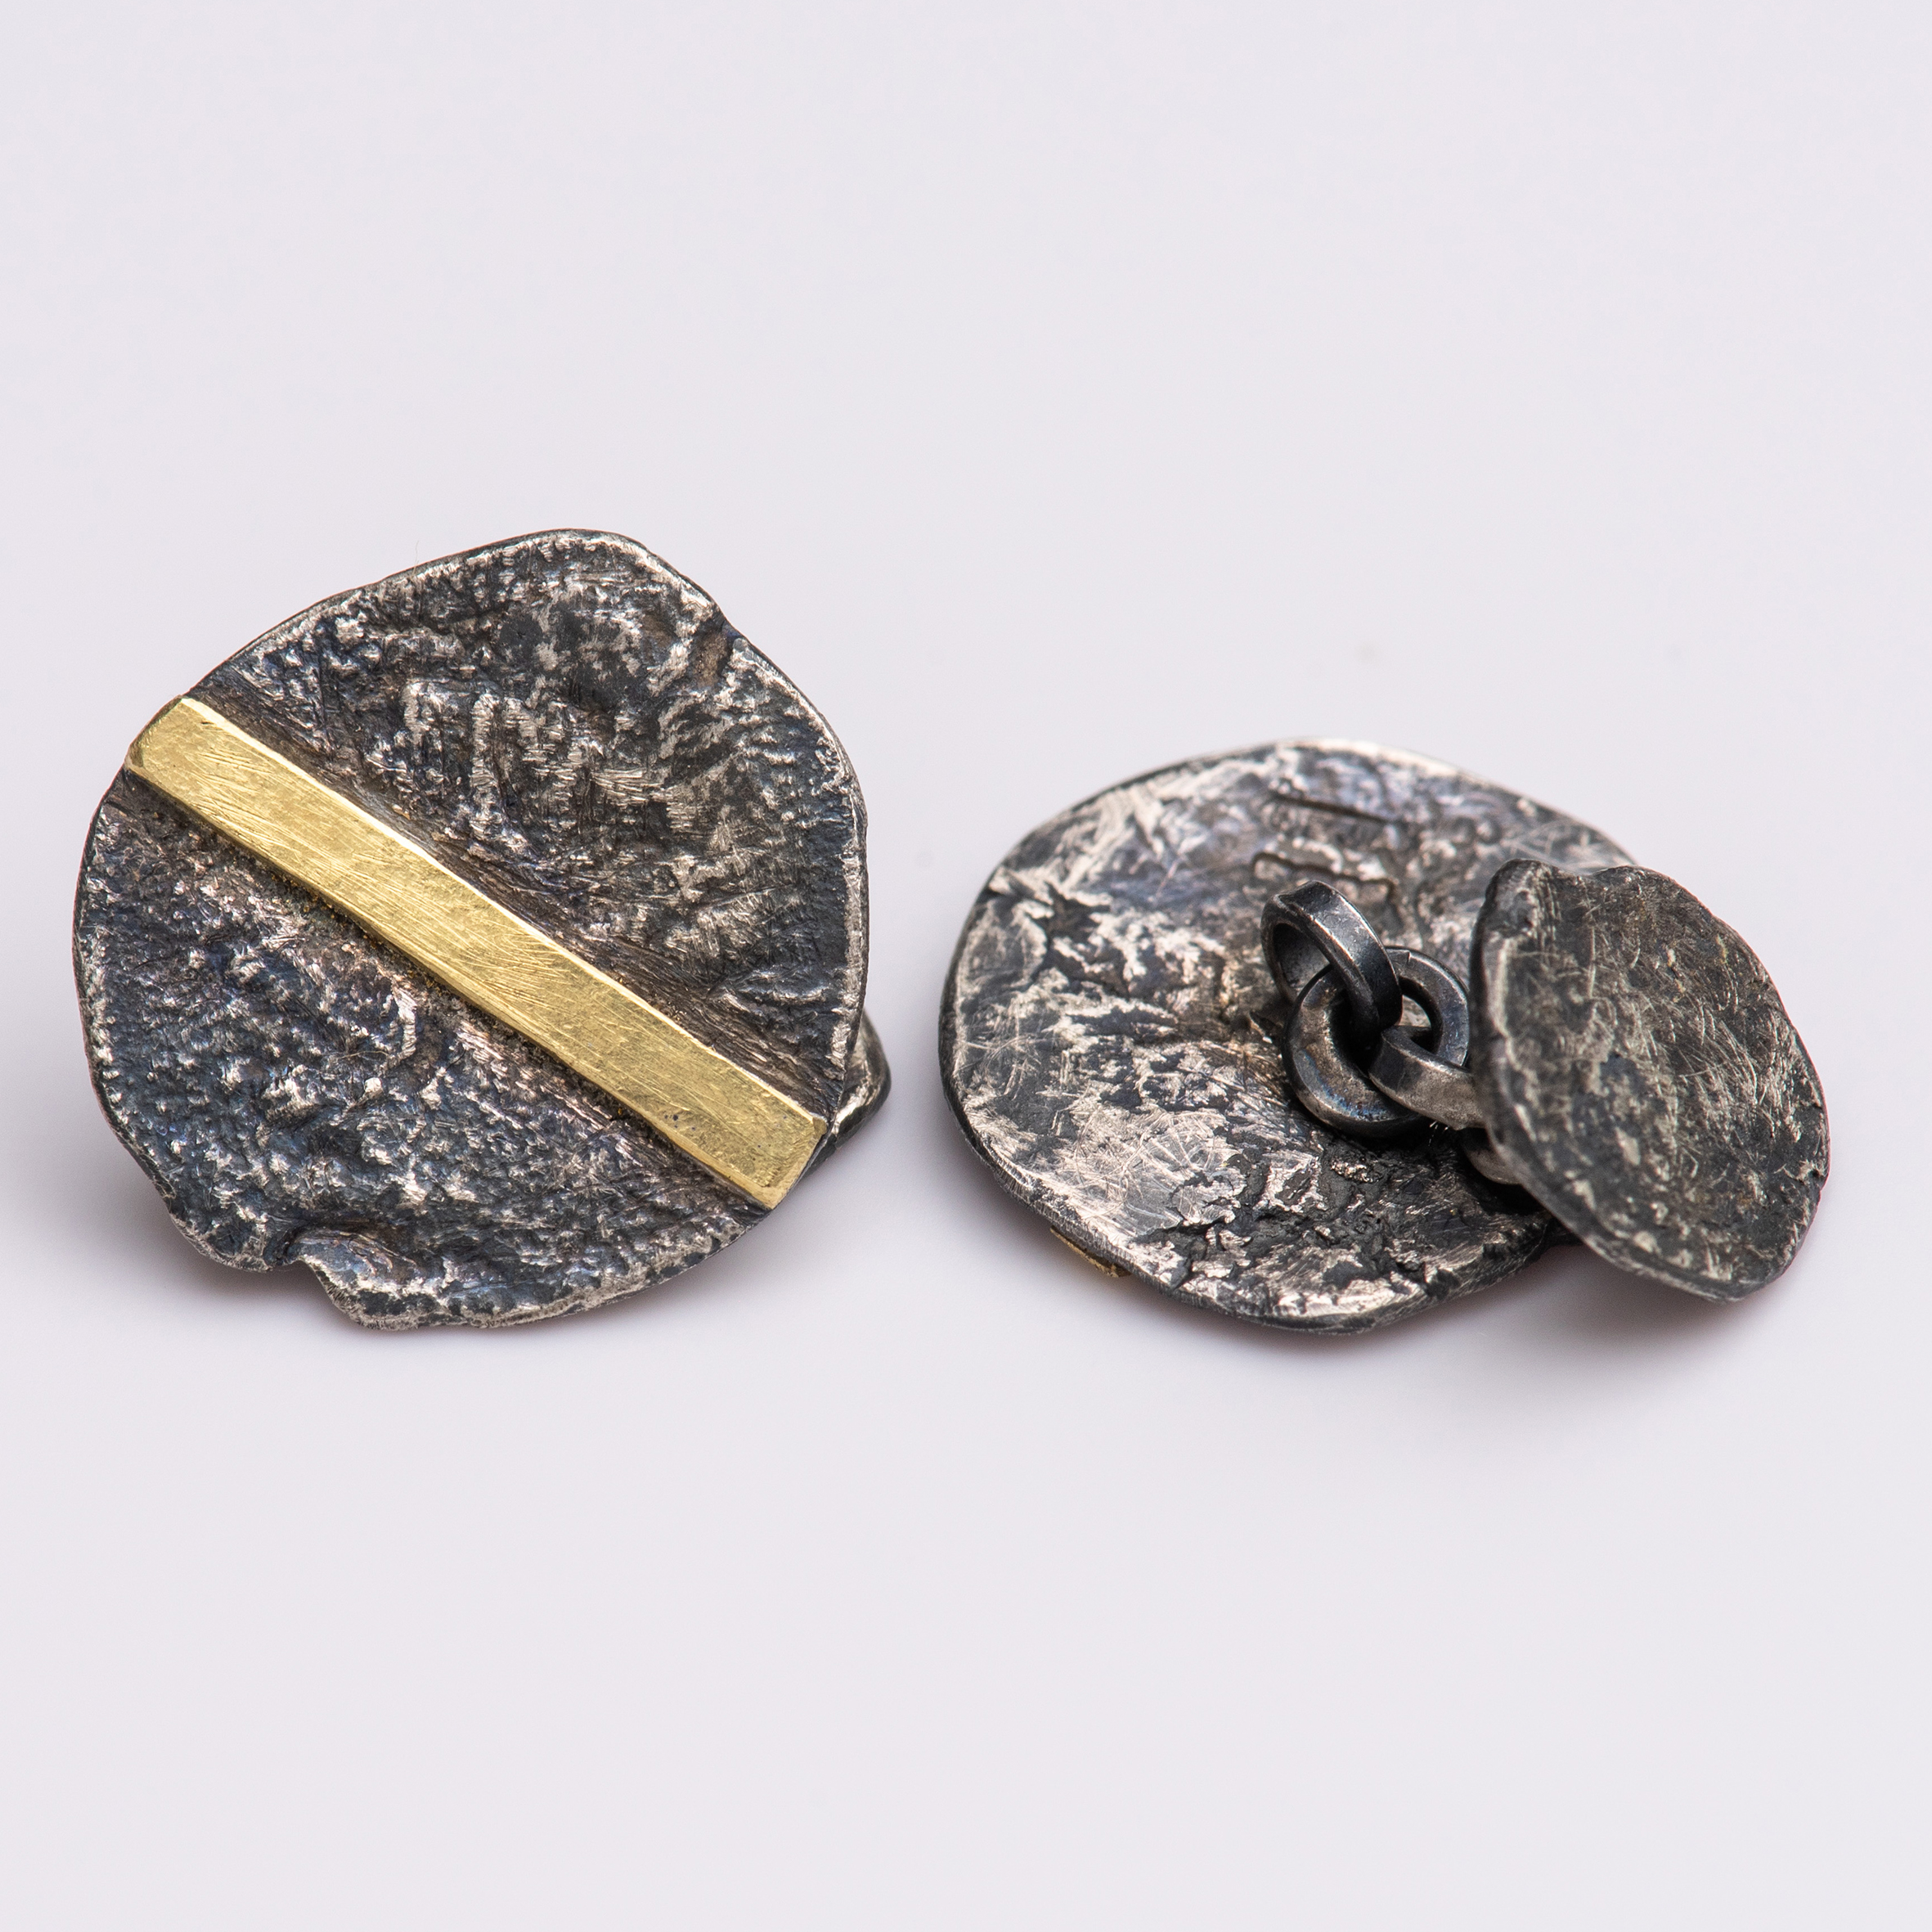 Details about   Handmade Oxidized Silver Plated Stone Cuff Links For men